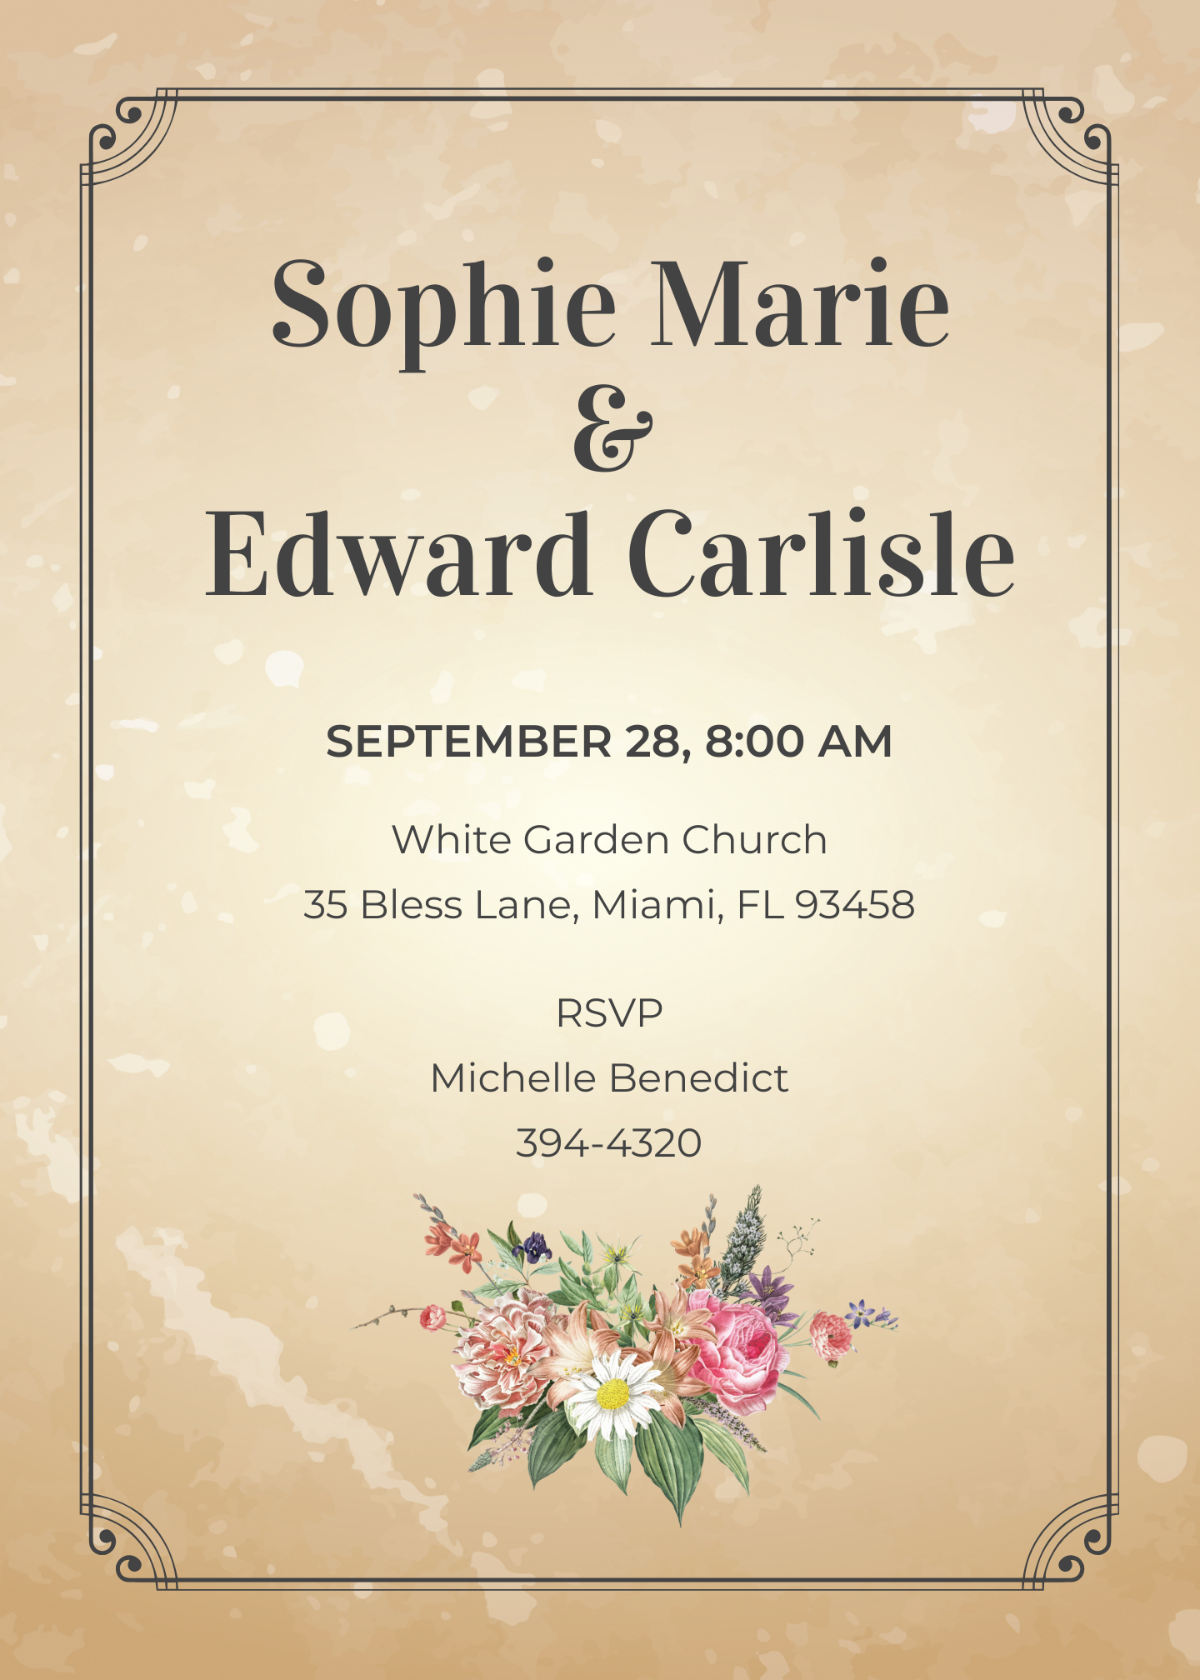 Vintage Wedding Invitation Save The Date Card Template